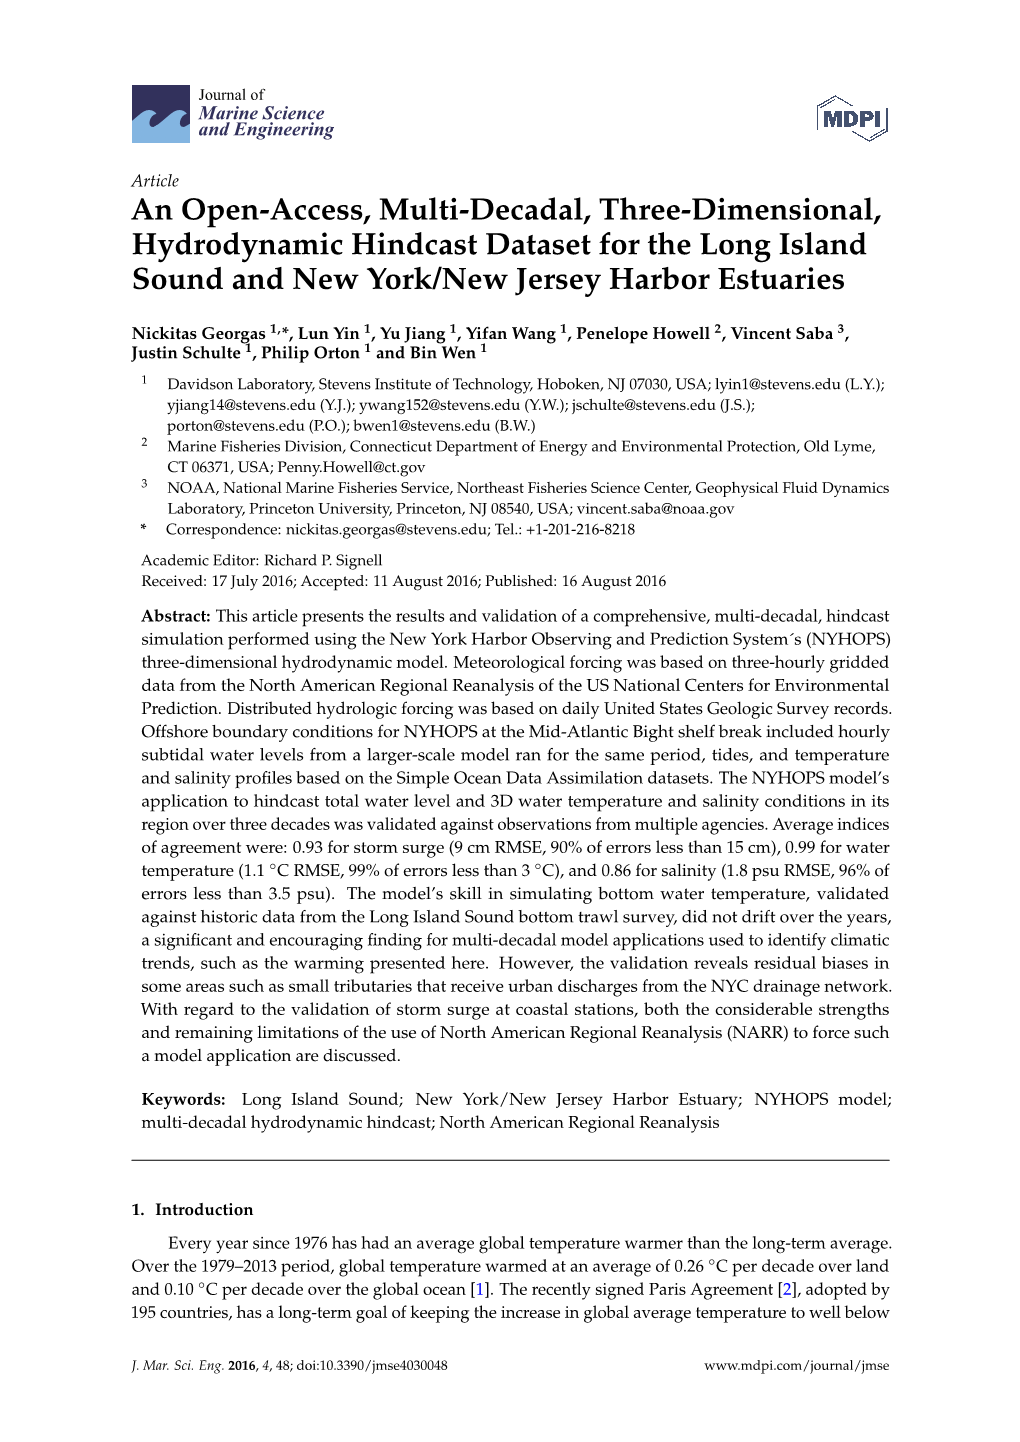 An Open-Access, Multi-Decadal, Three-Dimensional, Hydrodynamic Hindcast Dataset for the Long Island Sound and New York/New Jersey Harbor Estuaries